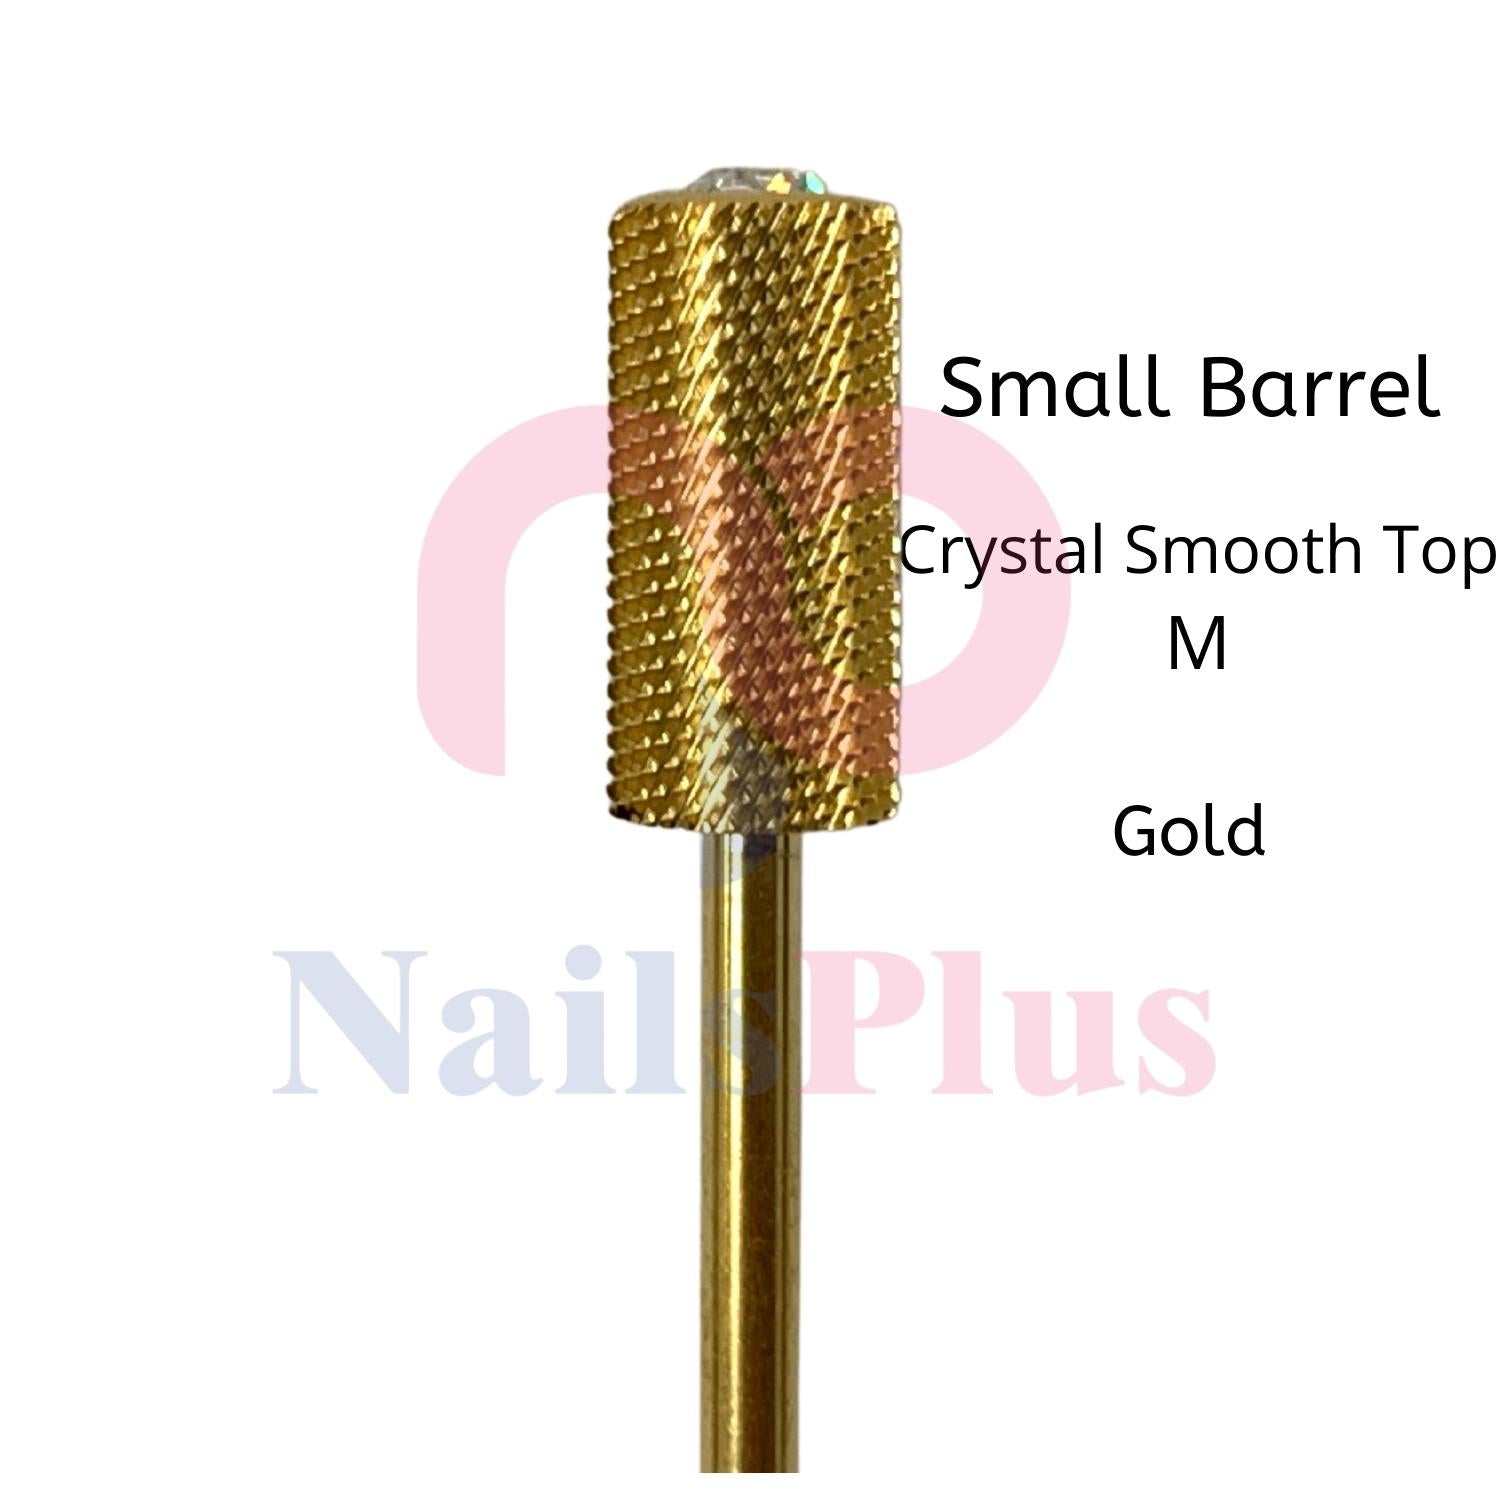 Small Barrel - Crystal Smooth Top - M